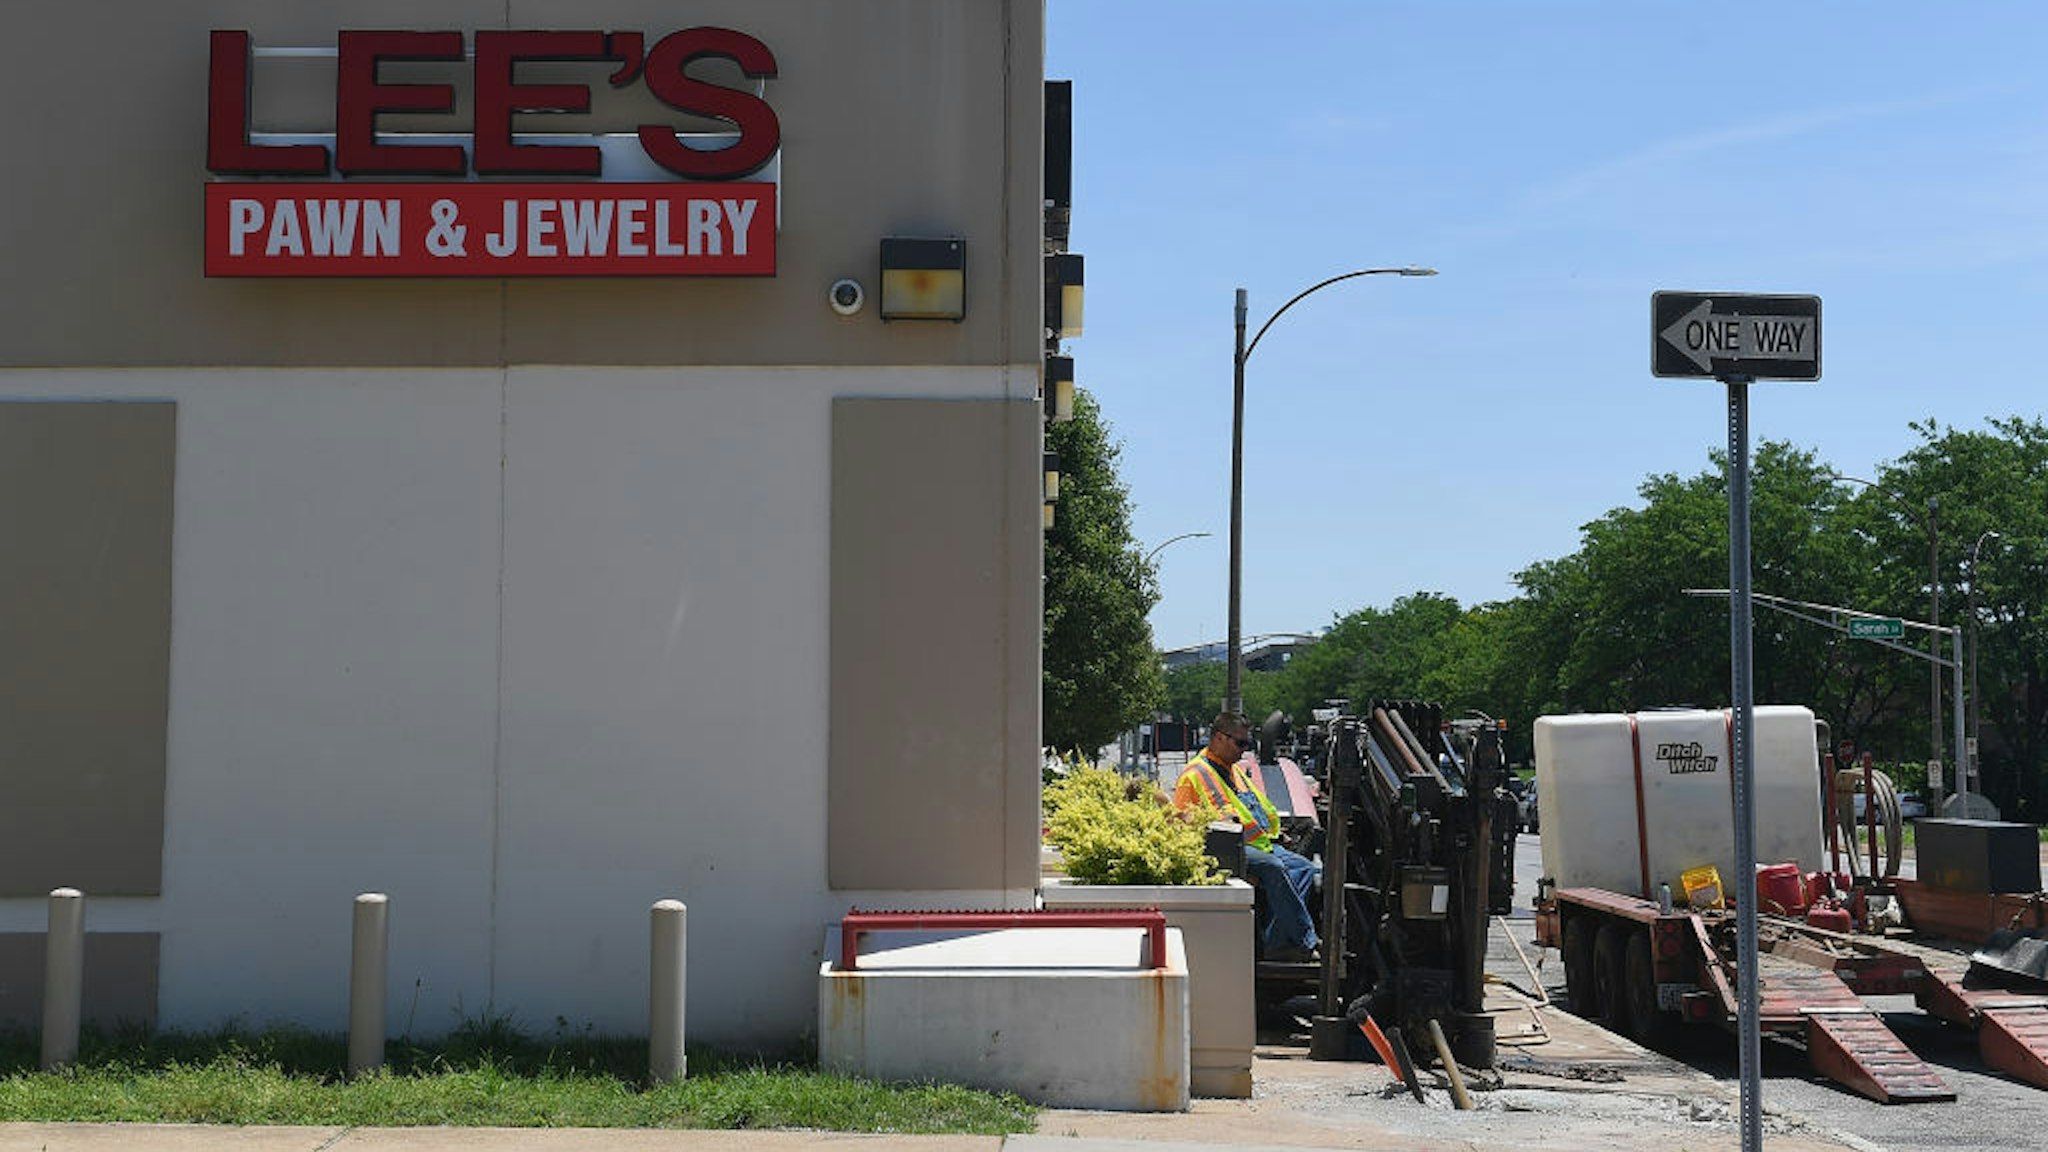 Construction is being done outside Lee's Pawn and Jewelry where David Dorn, a 77-year-old retired police captain who was murdered during overnight rioting, on June 2, 2020 in St Louis, Missouri.